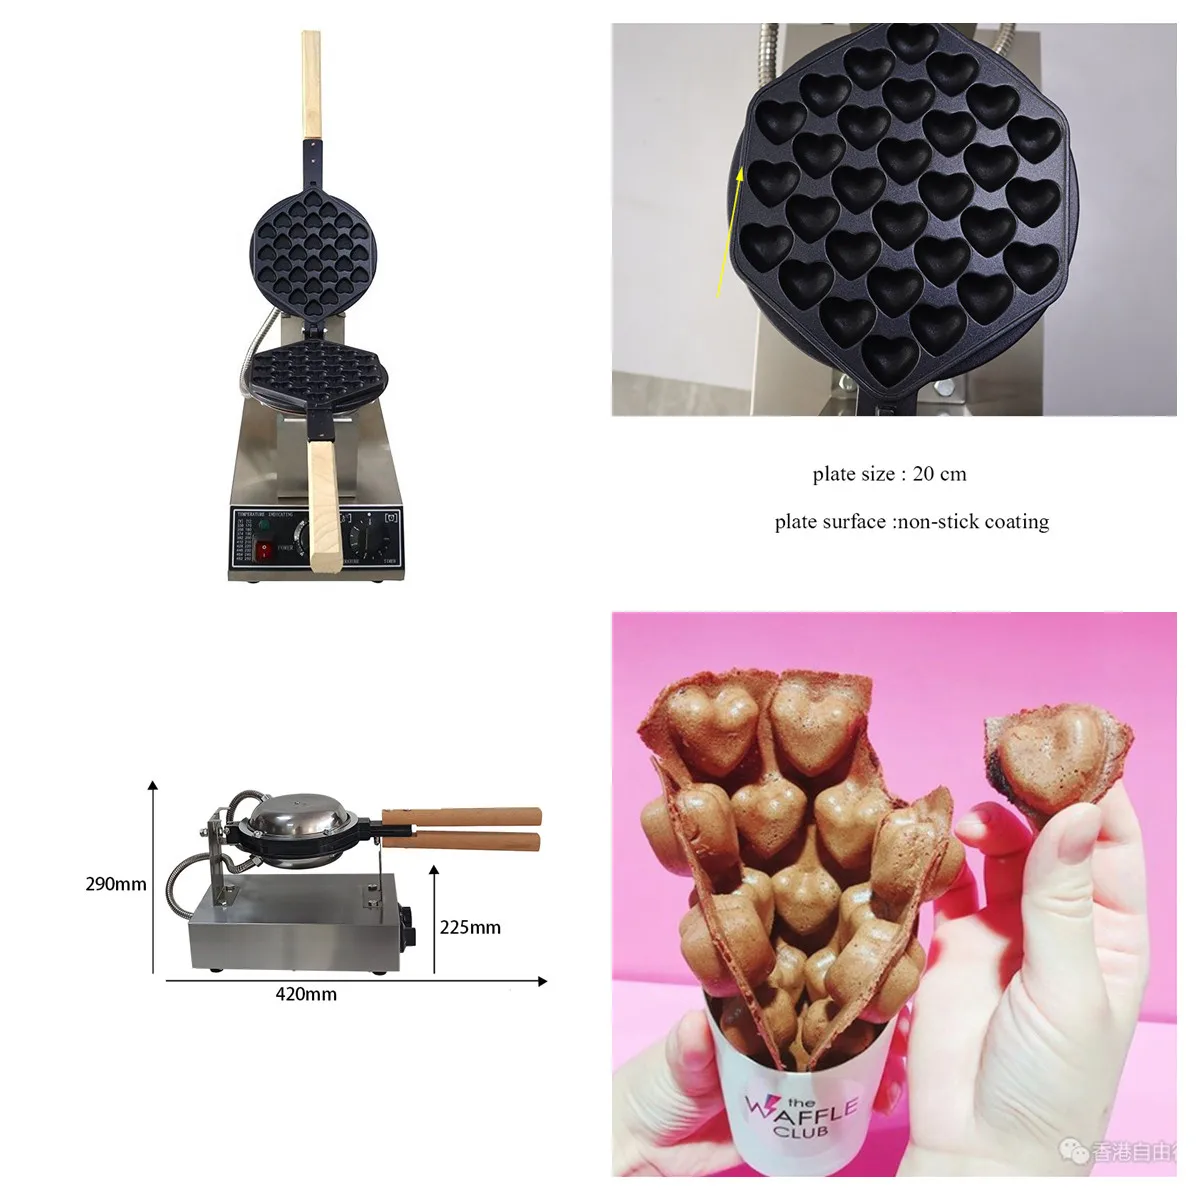 Rotary Oval And Heart Shape Hong Kong Egg Bubble Waffle Maker Commercial Stainless Steel Non-stick Snack Waffles Making Machine